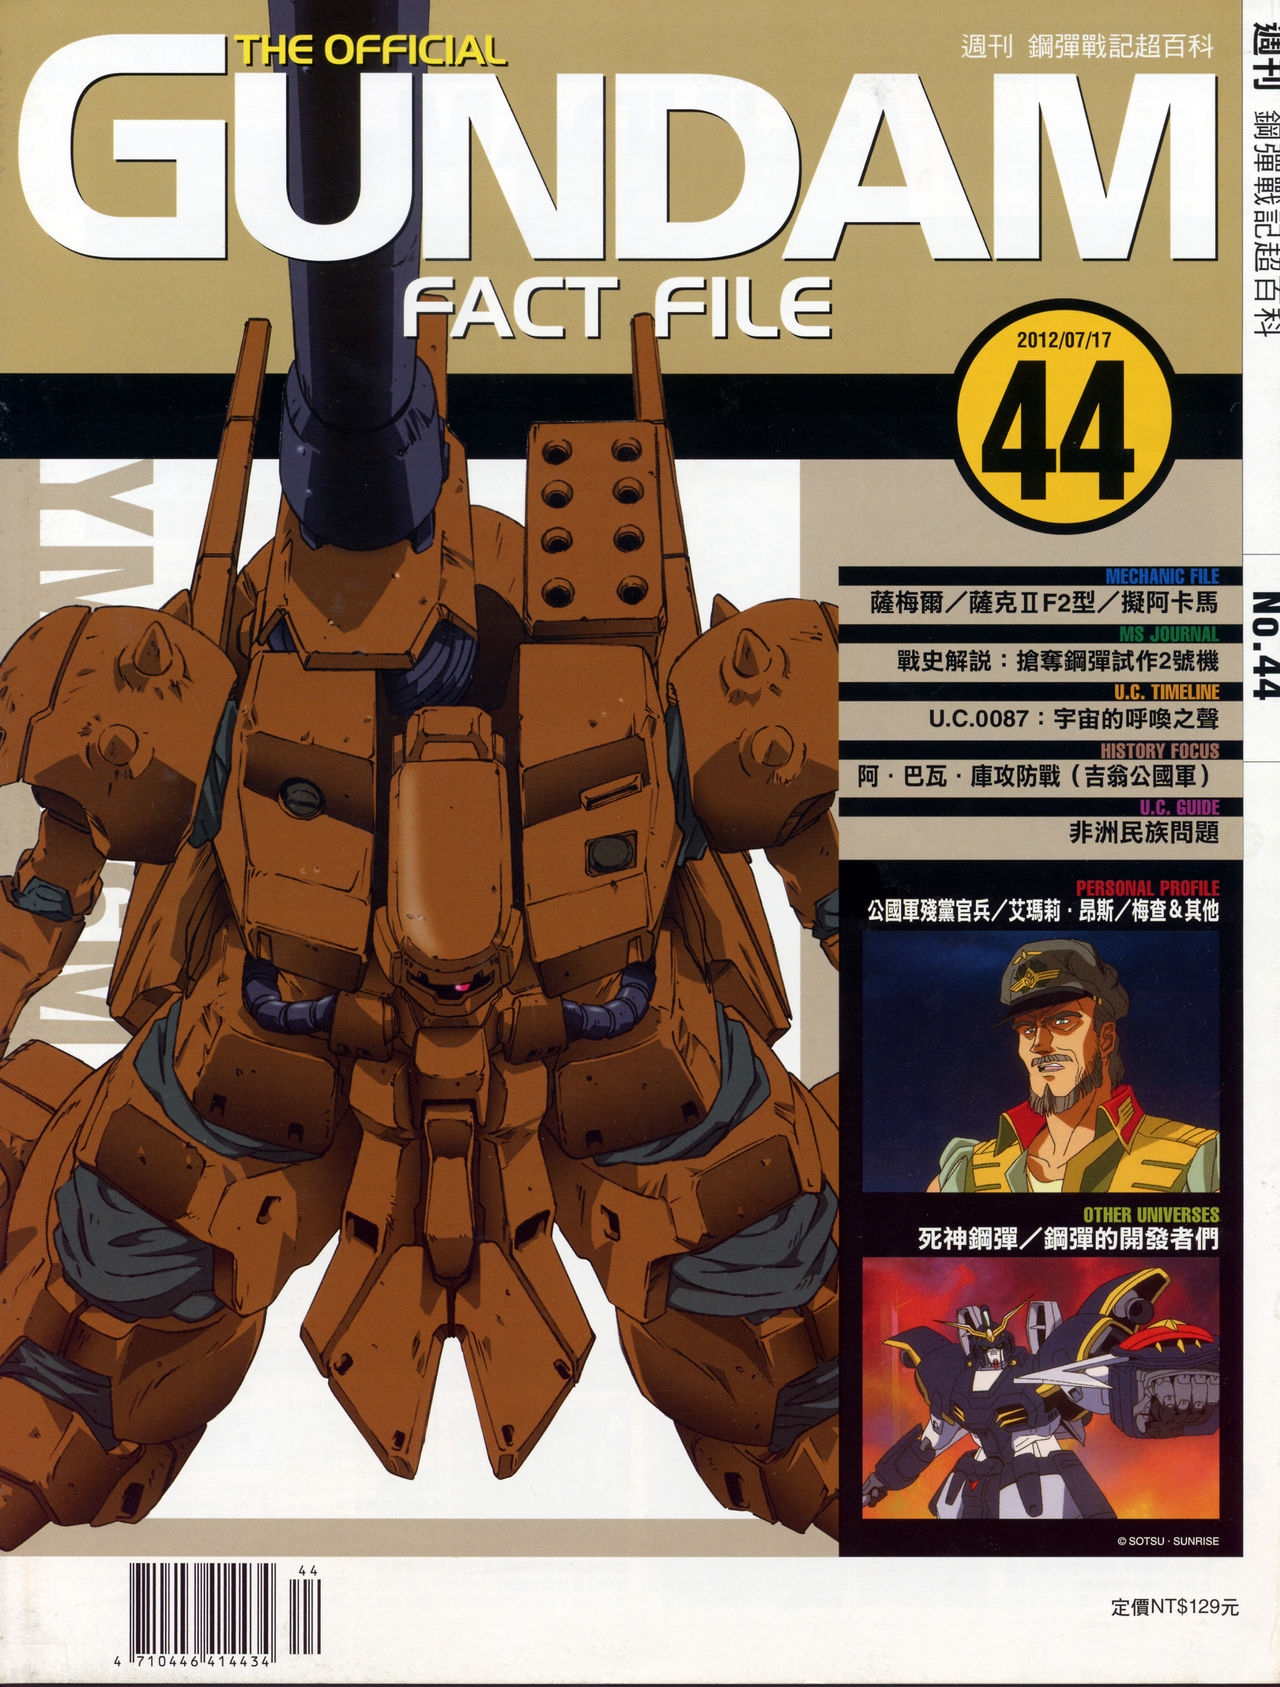 The Official Gundam Fact File - 044 [Chinese] 35